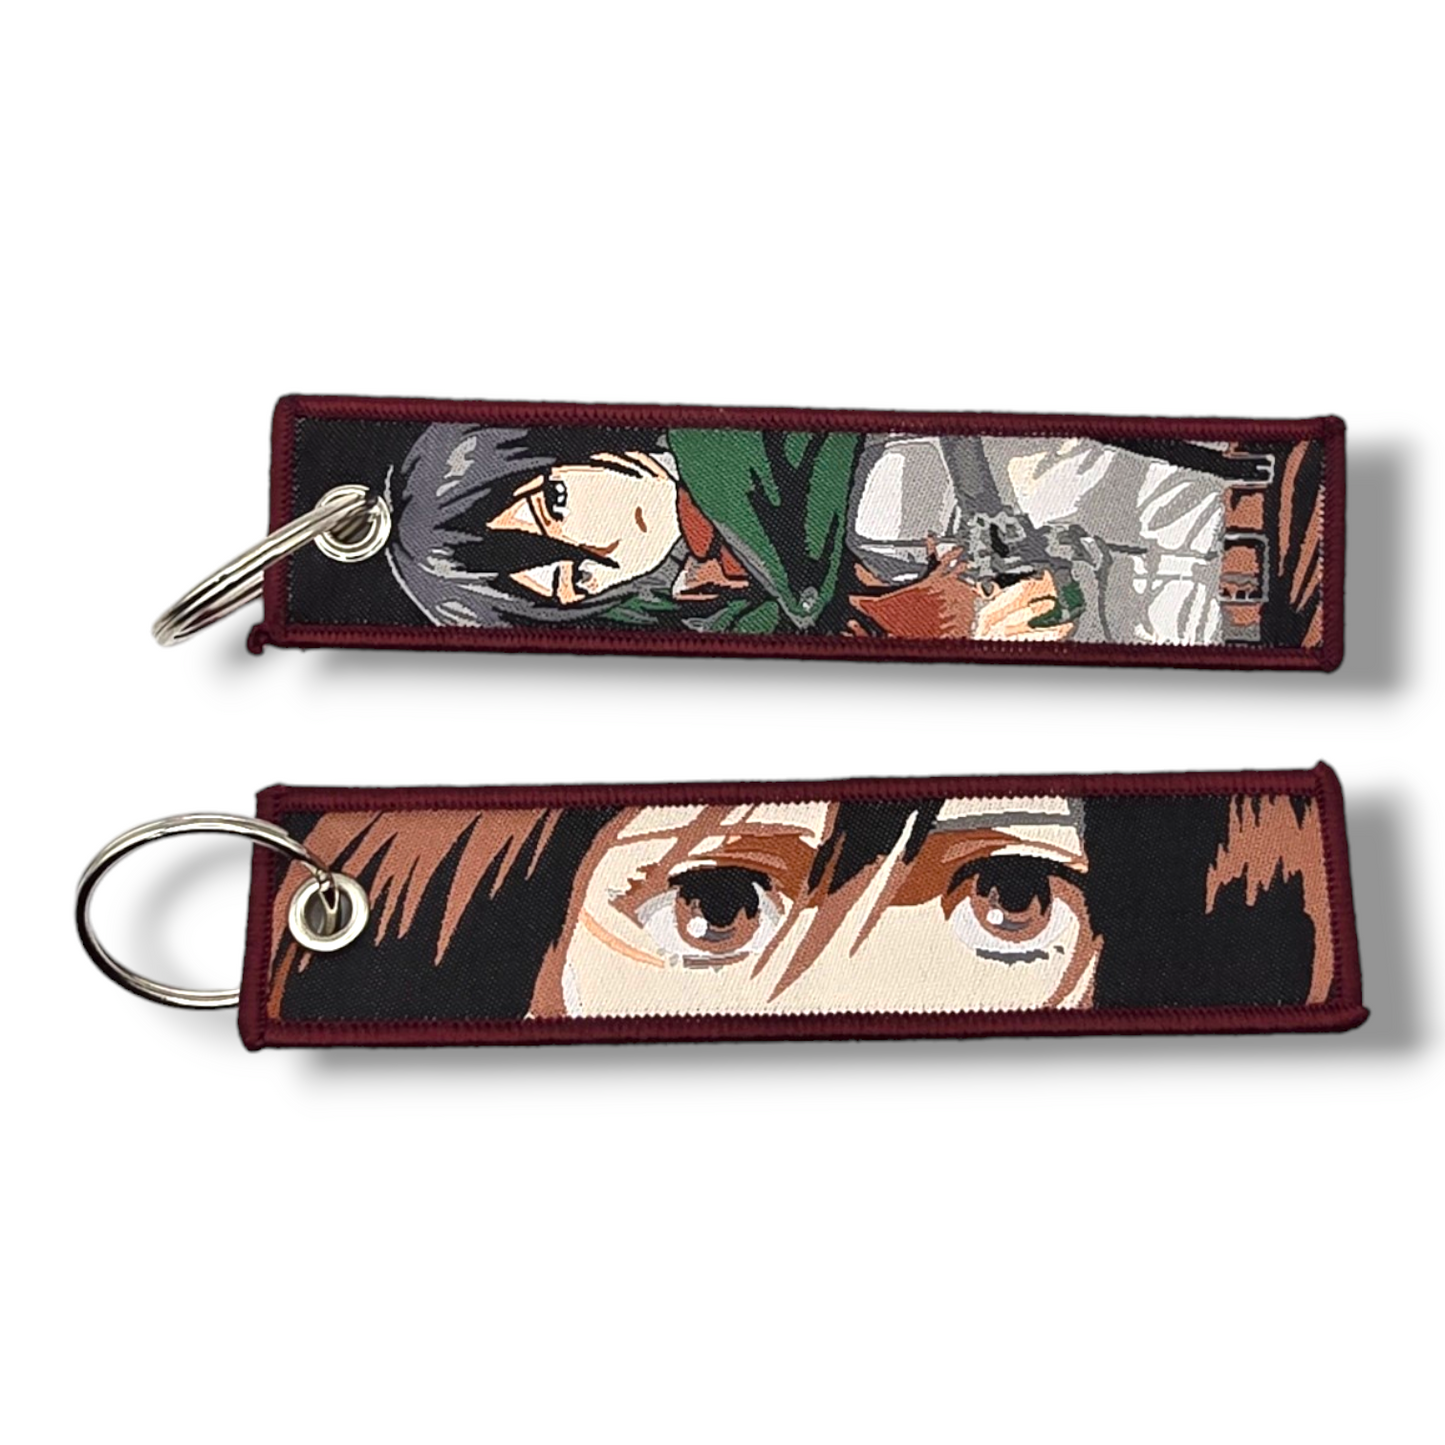 ATTACK ON TITANS JET TAGS